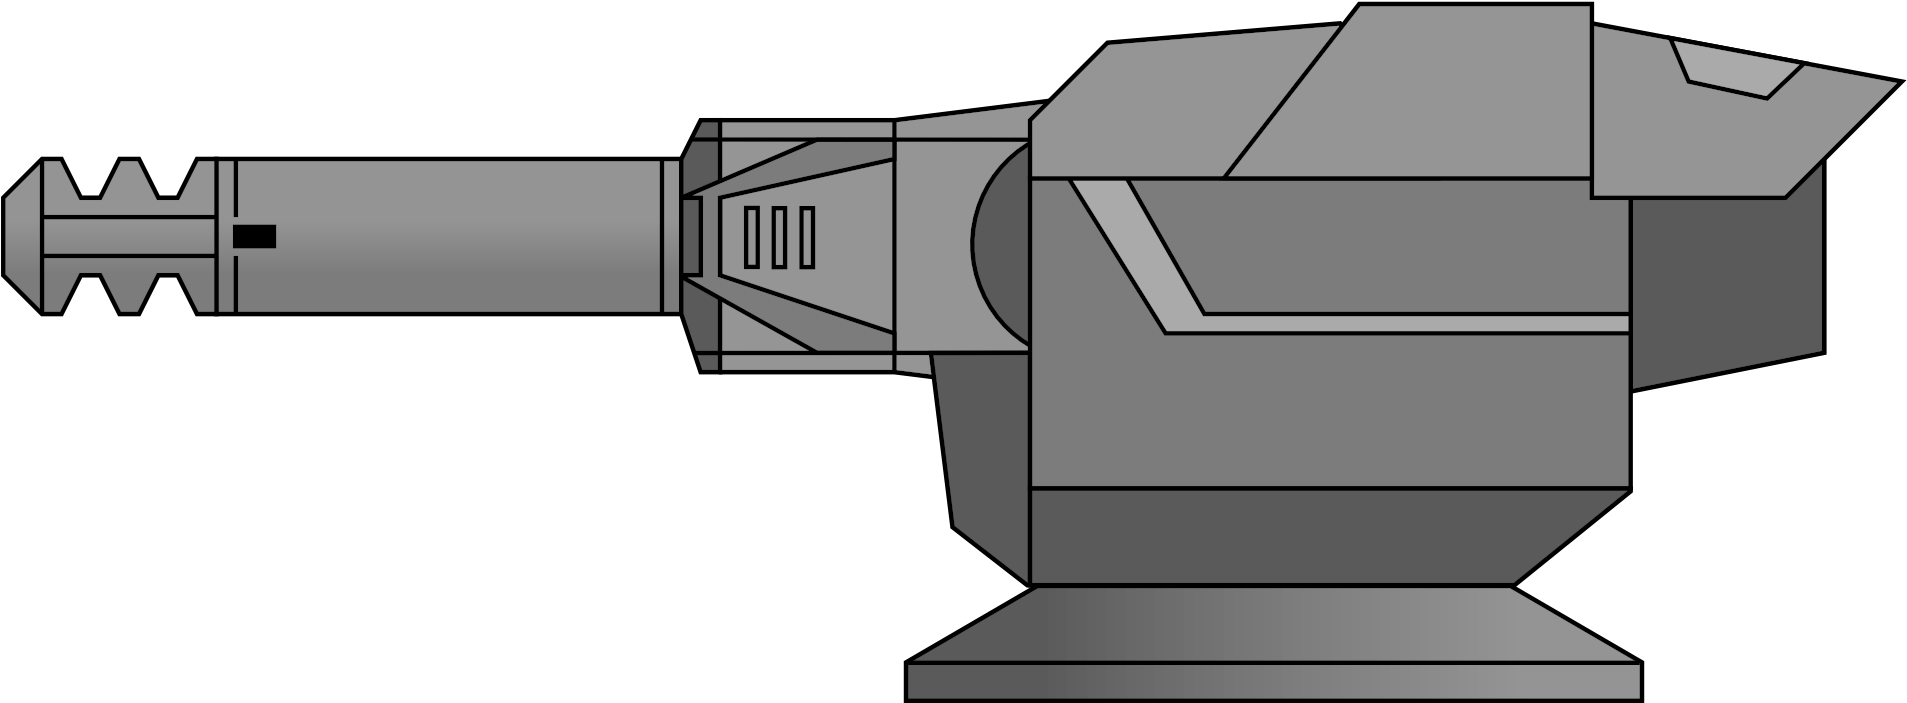 Halo Legends Wiki - Cannon Png (2000x800)